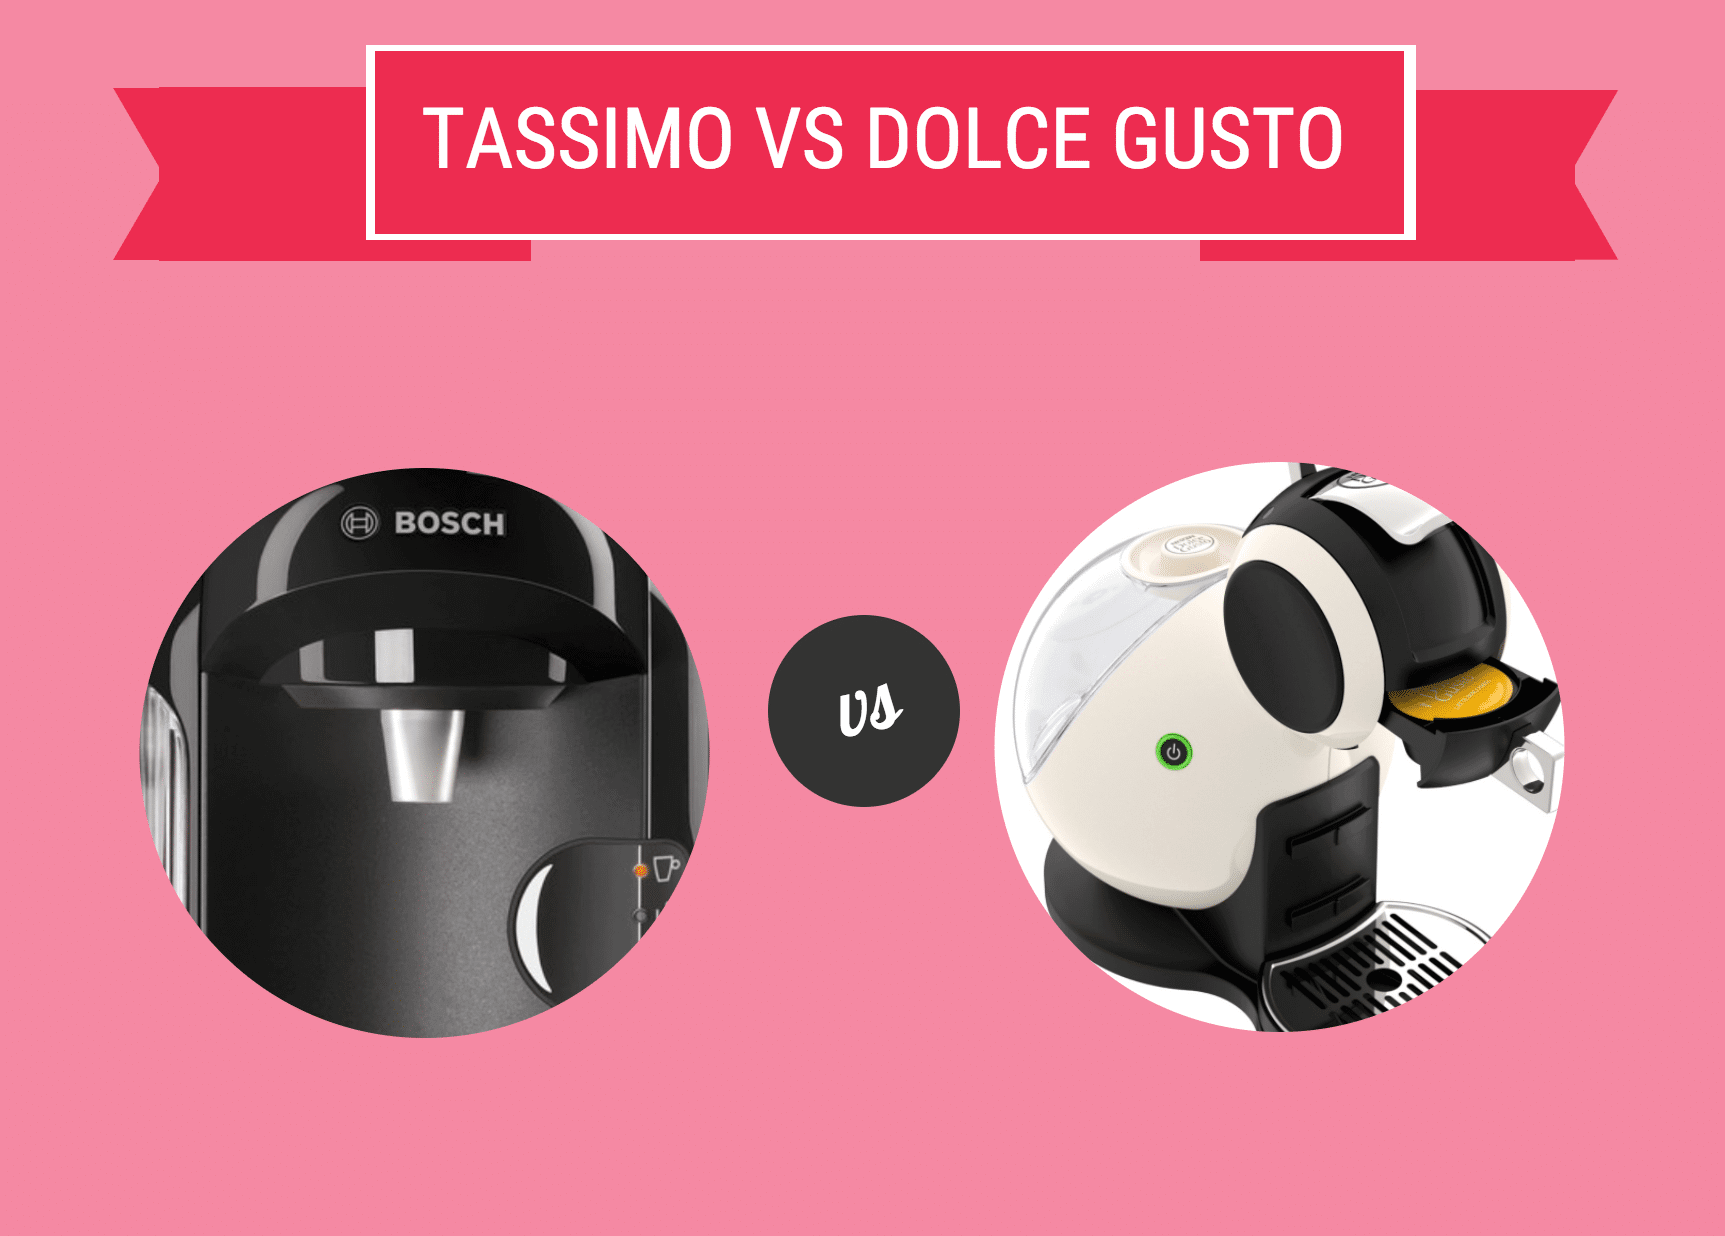 Tassimo vs Dolce Gusto: Battle of the Coffee Machines